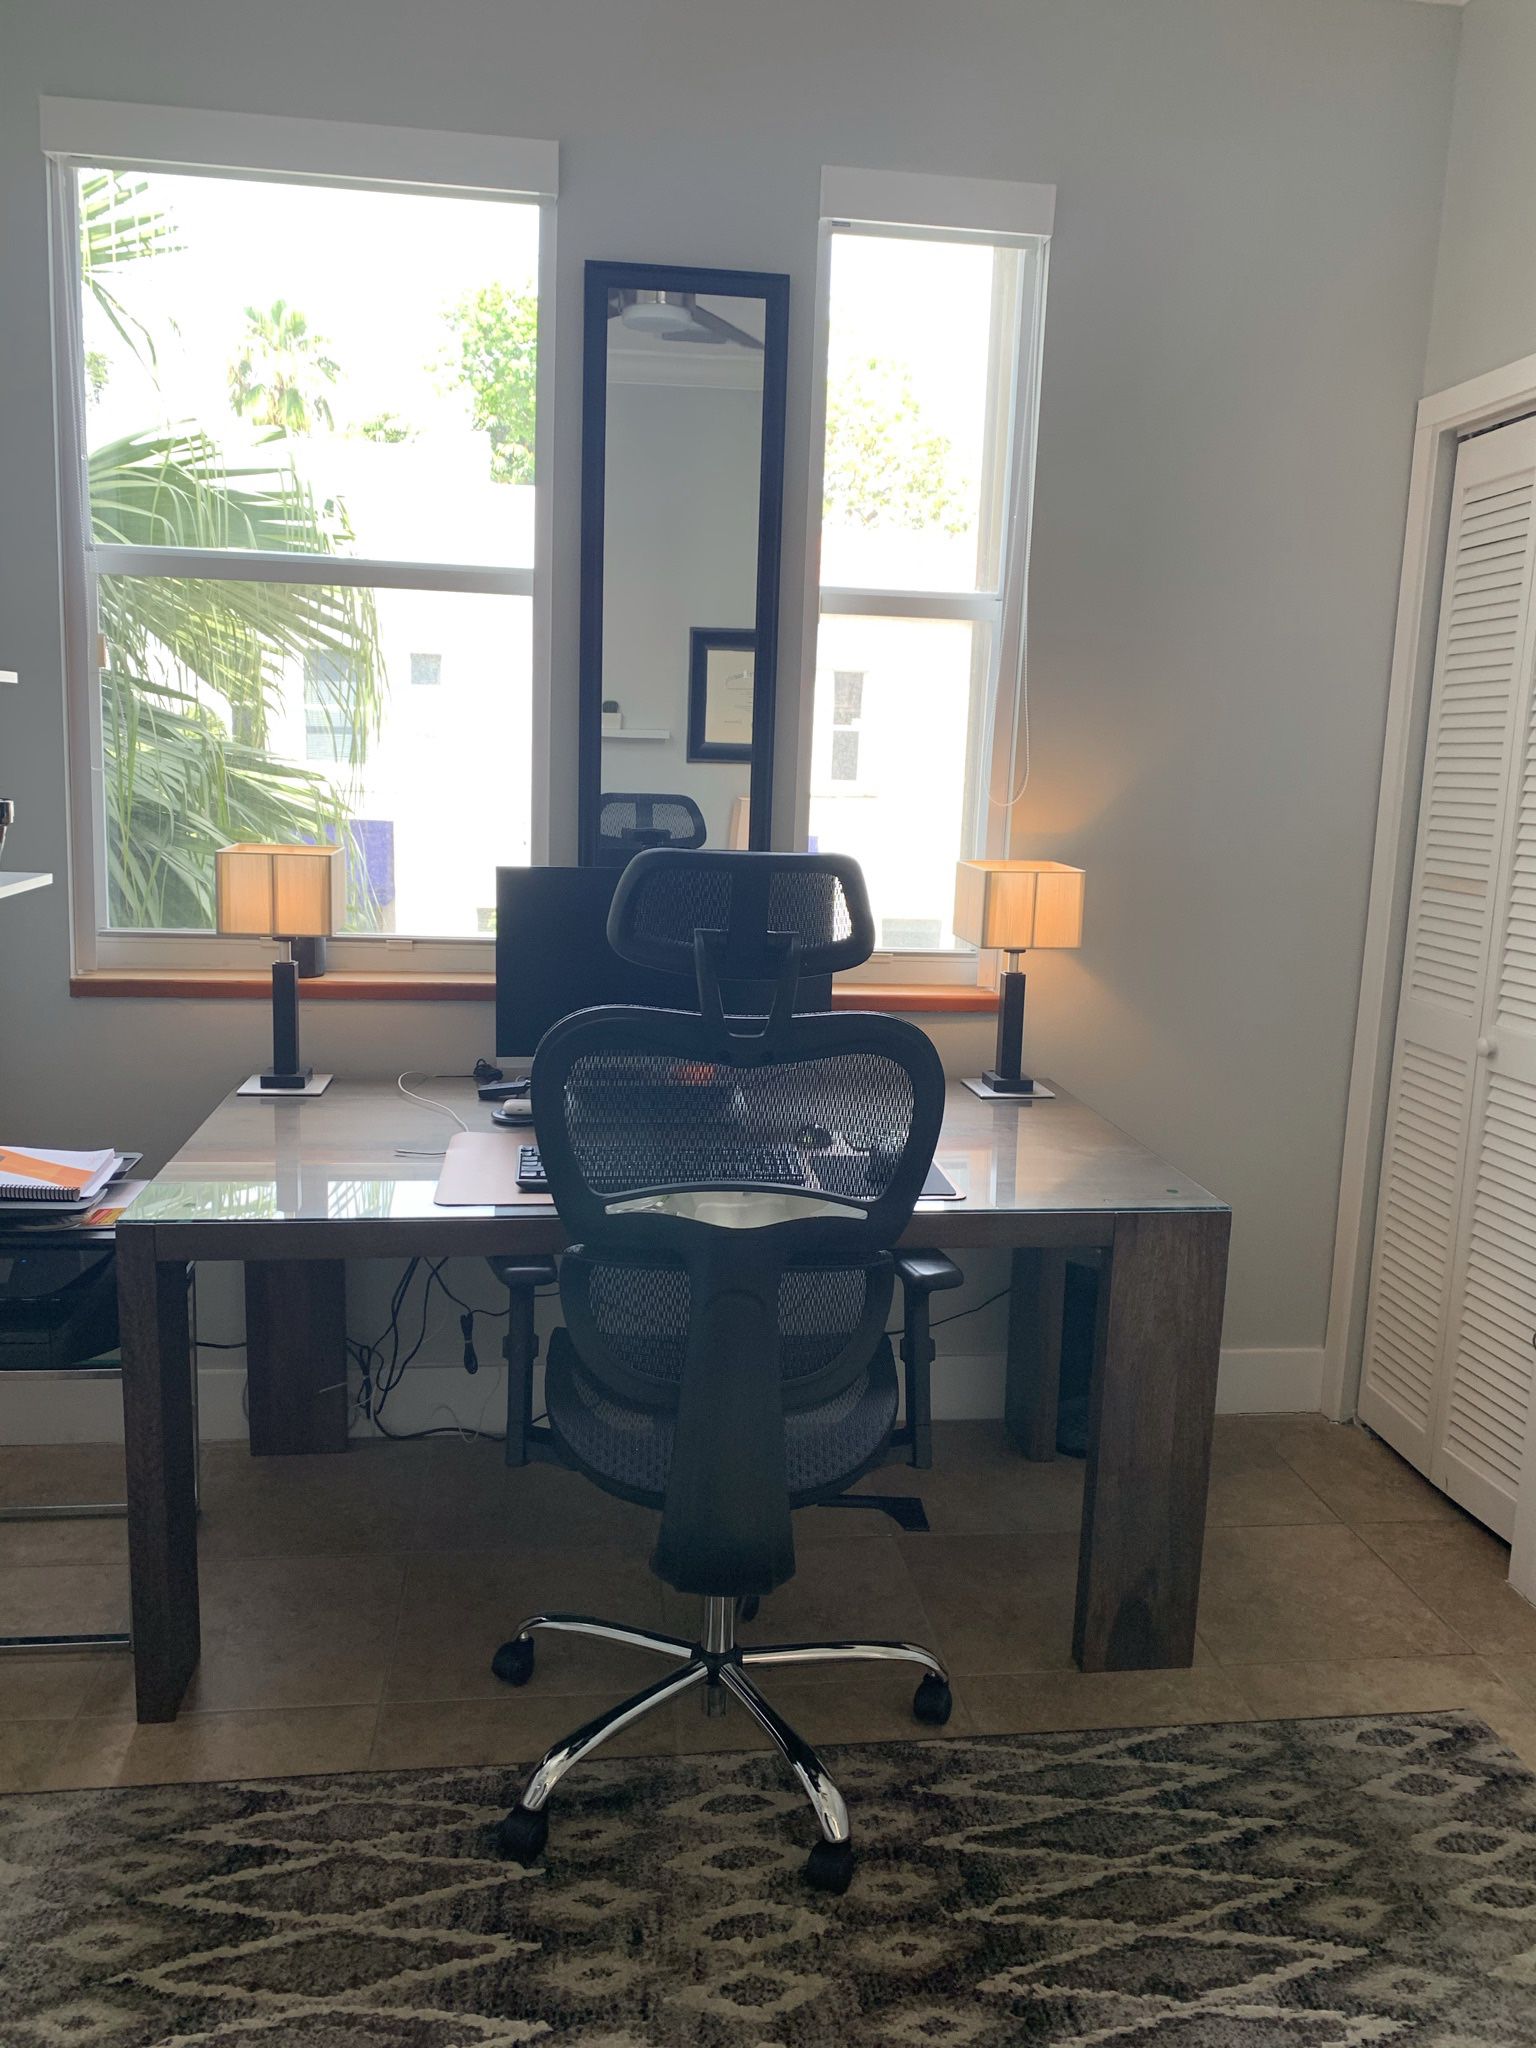 Crate & Barrel Original Dining Table (used As Office Desk)